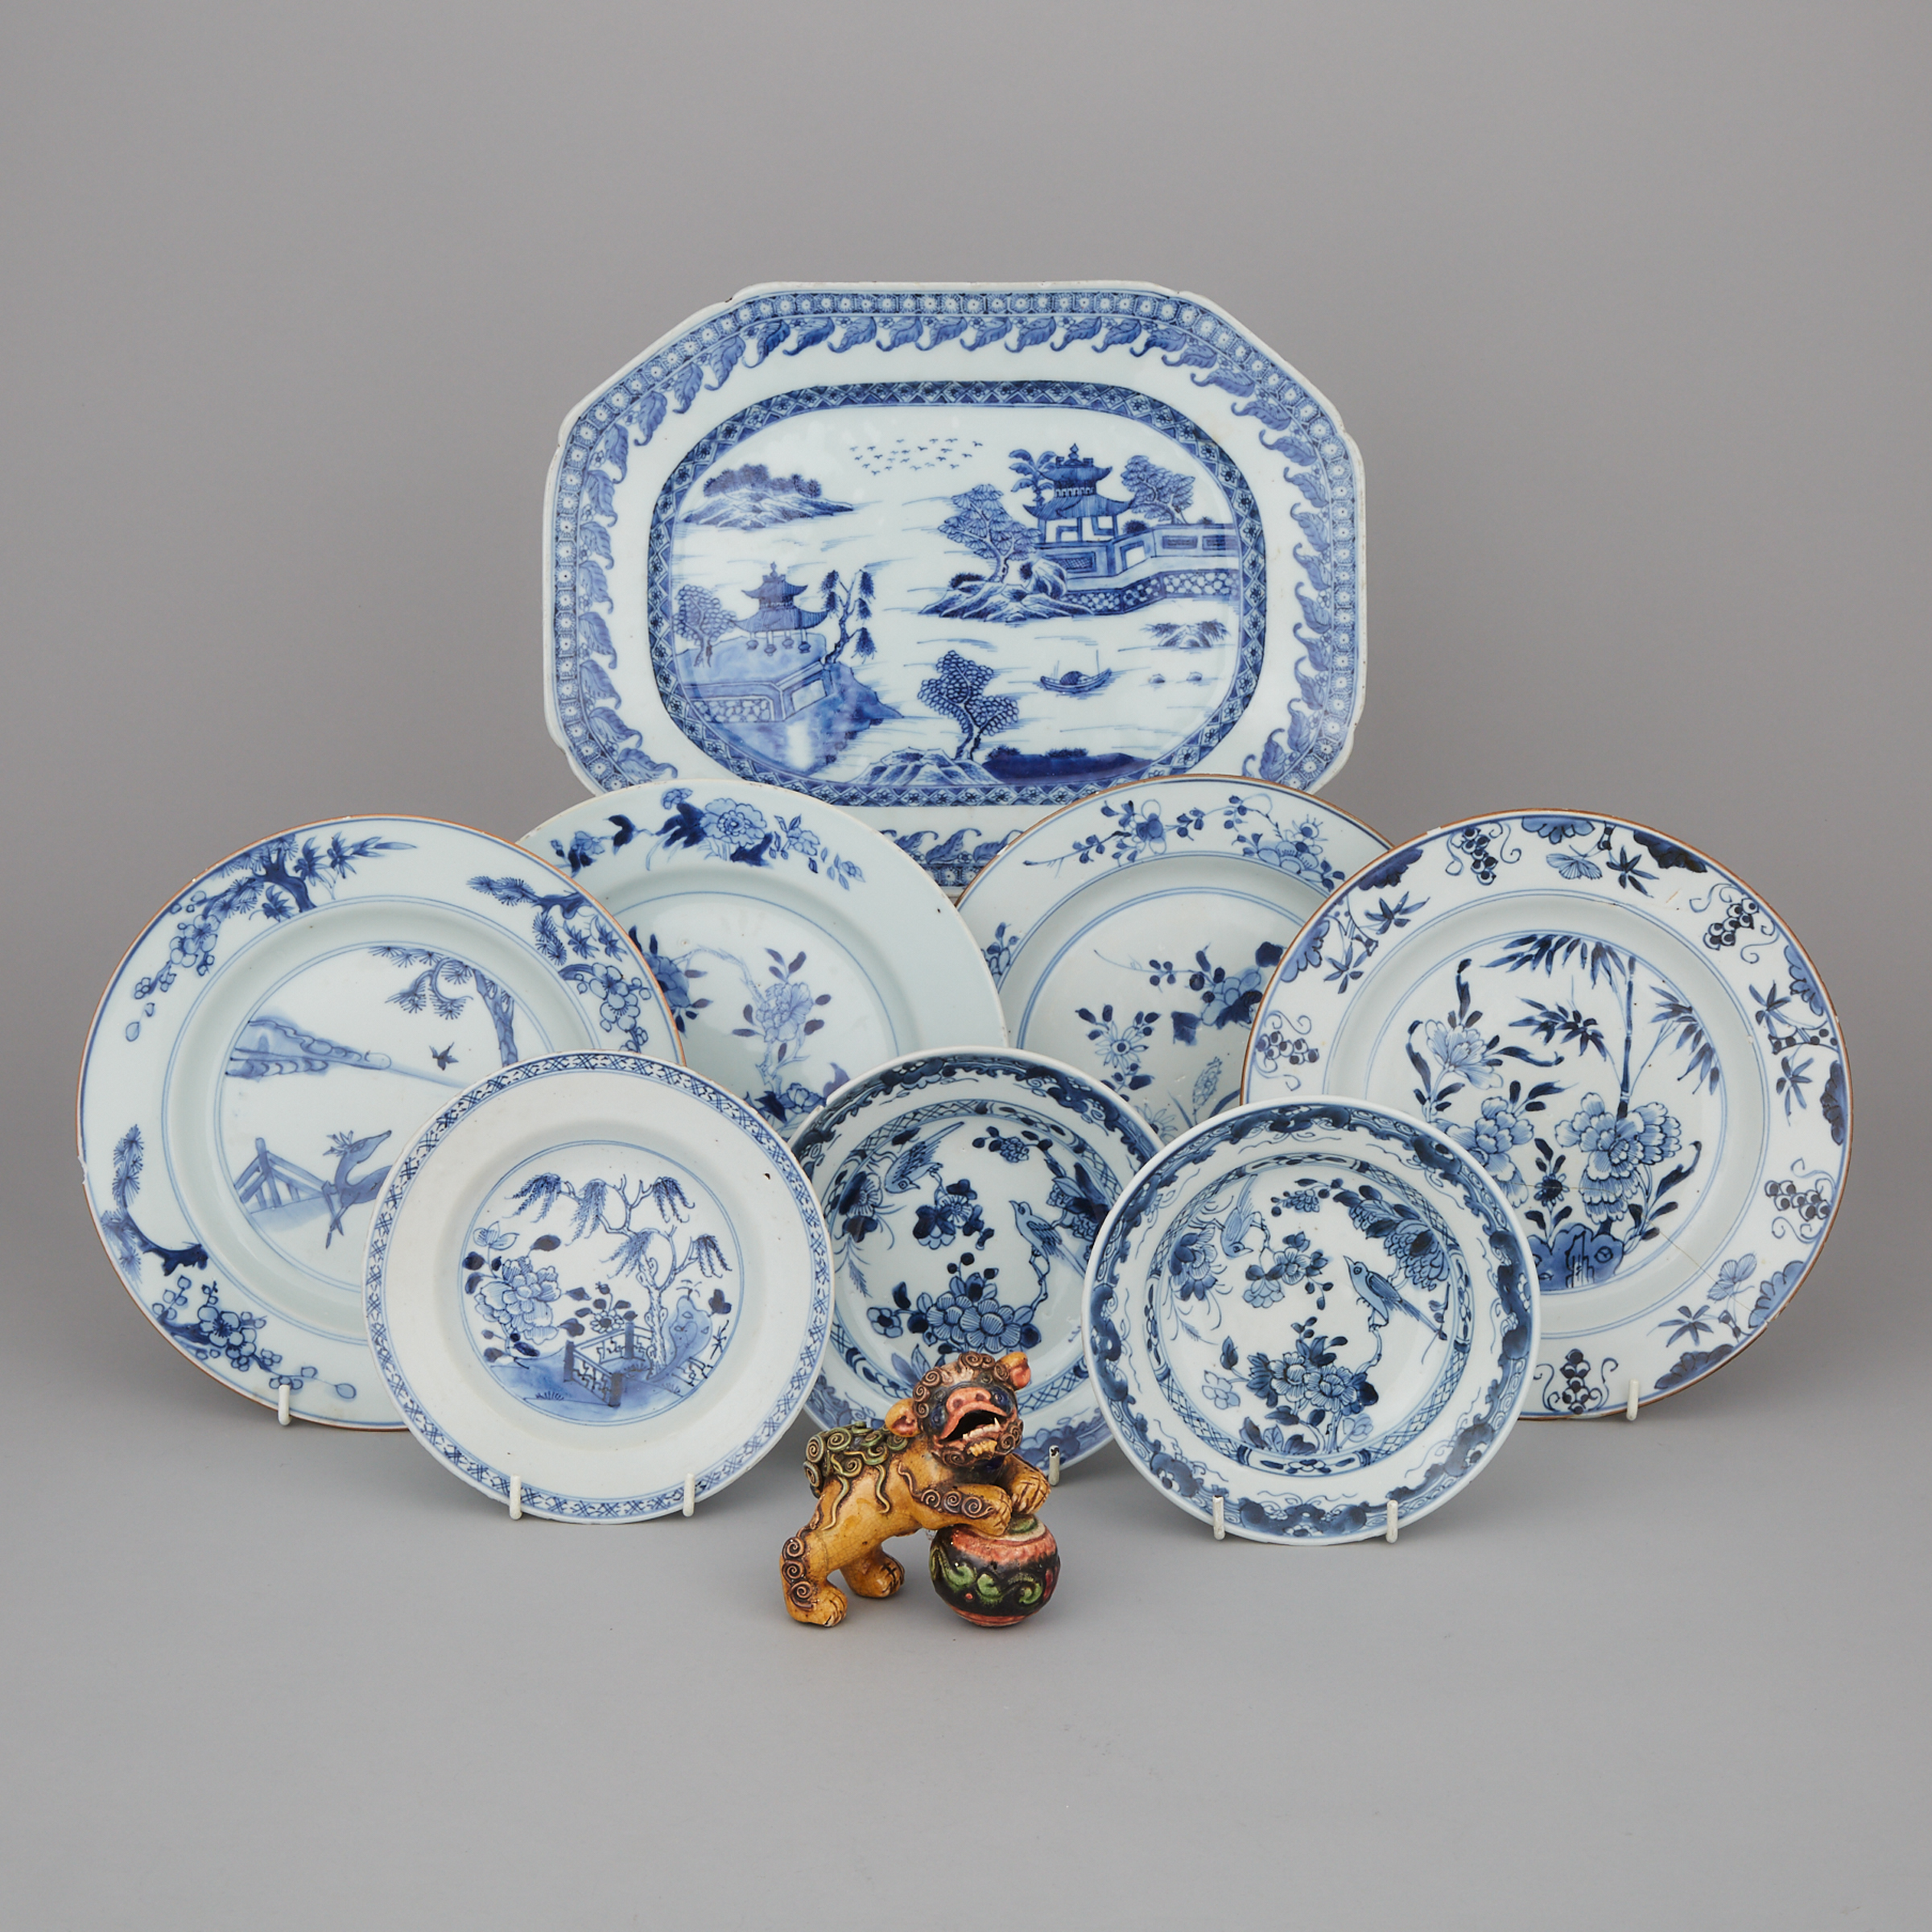 A Group of Eight Export Blue and White Dishes, 19th/20th Century